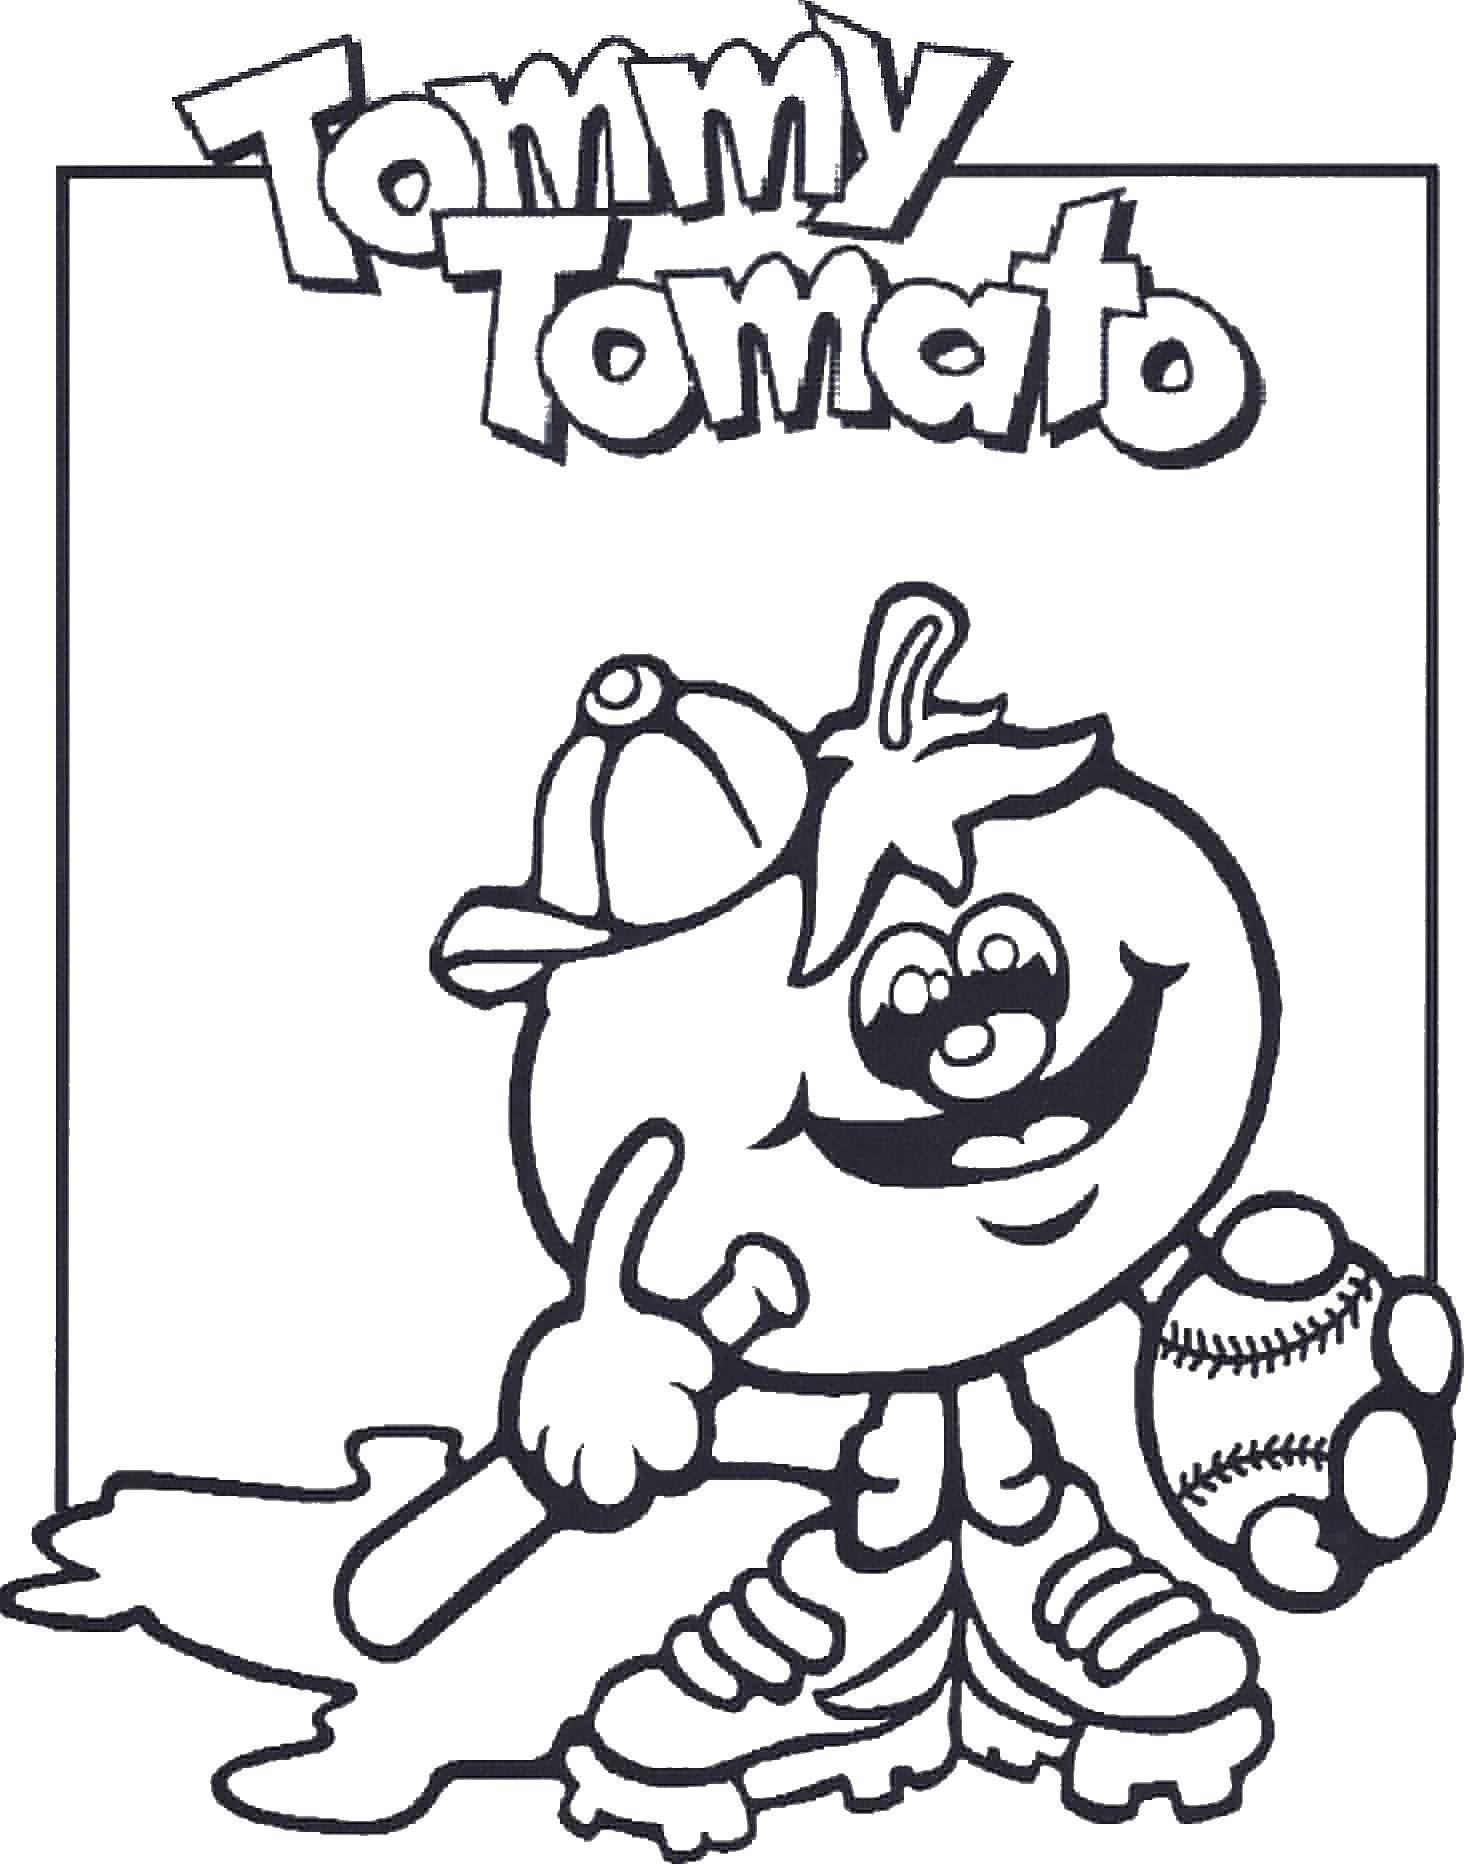 Coloring Tommy tomato. Category The food. Tags:  tomato, vegetables.